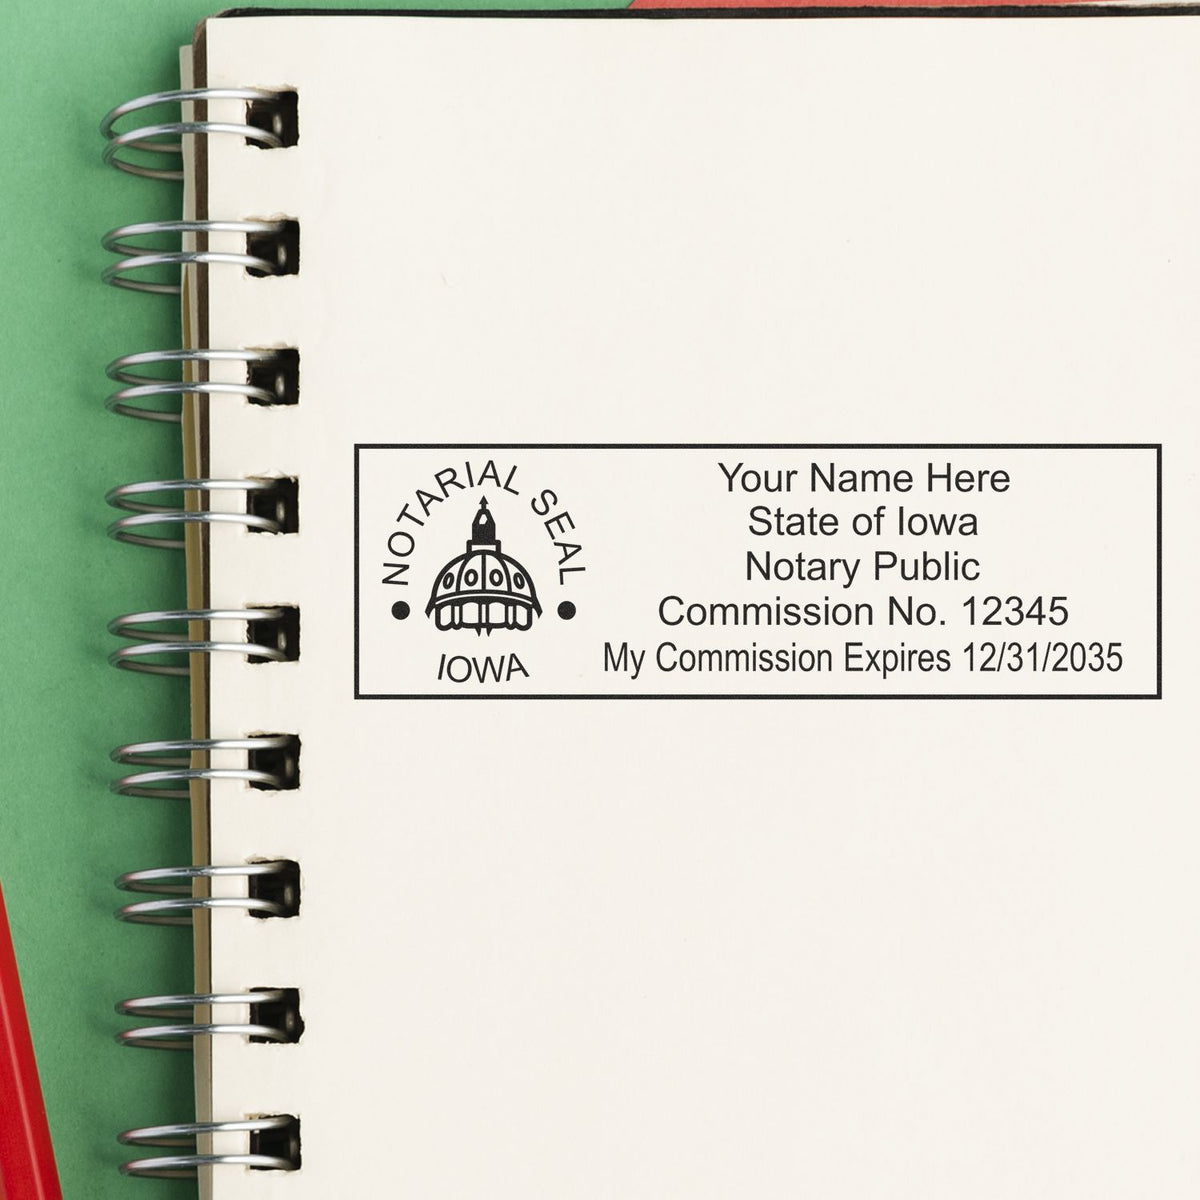 A lifestyle photo showing a stamped image of the Heavy-Duty Iowa Rectangular Notary Stamp on a piece of paper